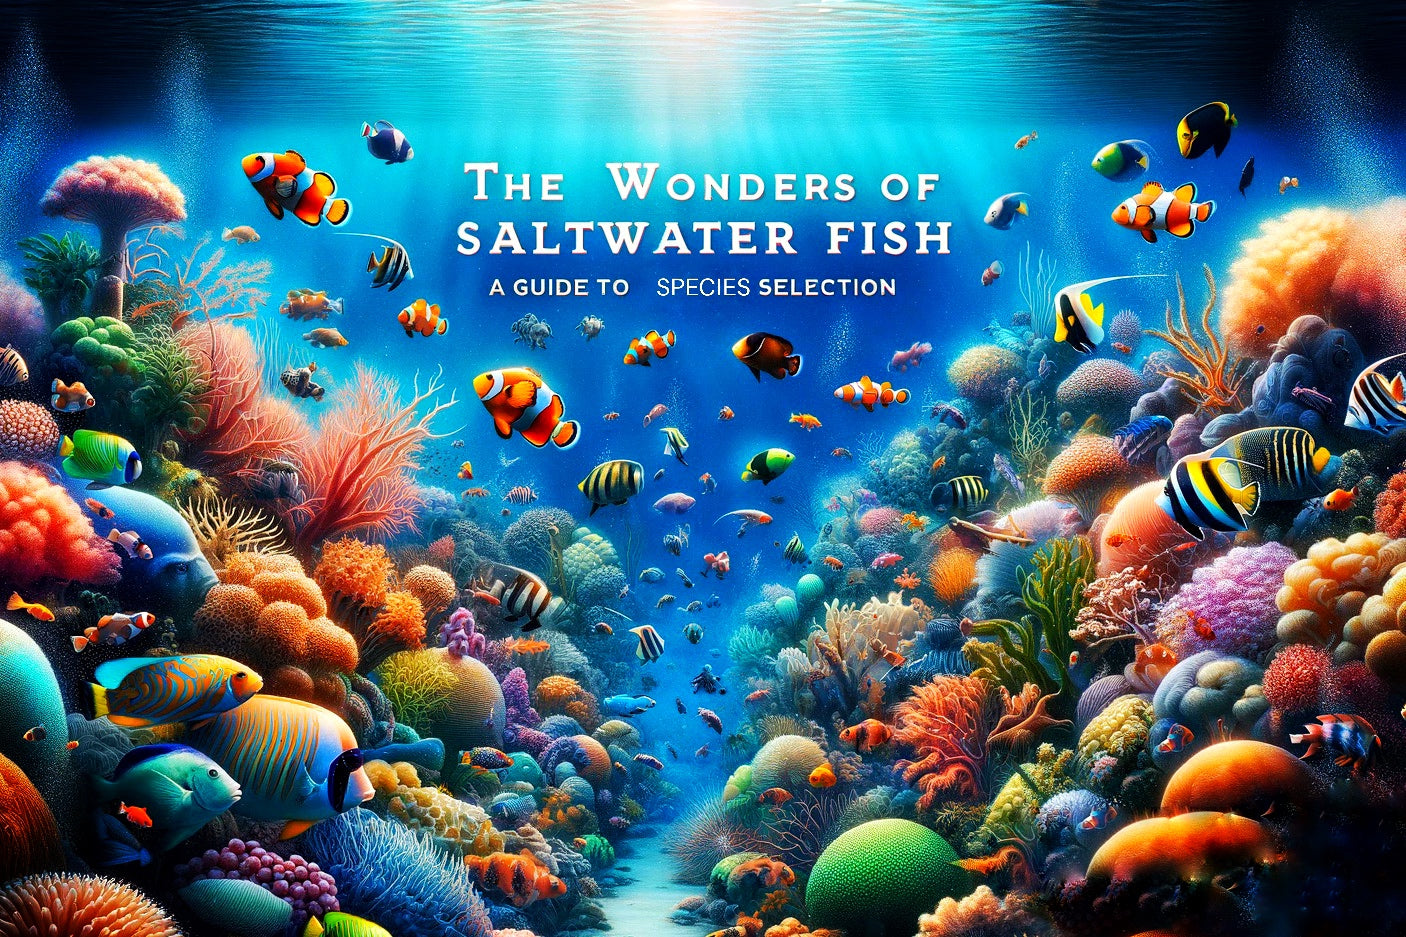 The Wonders of Saltwater Fish: A Guide to Species Selection